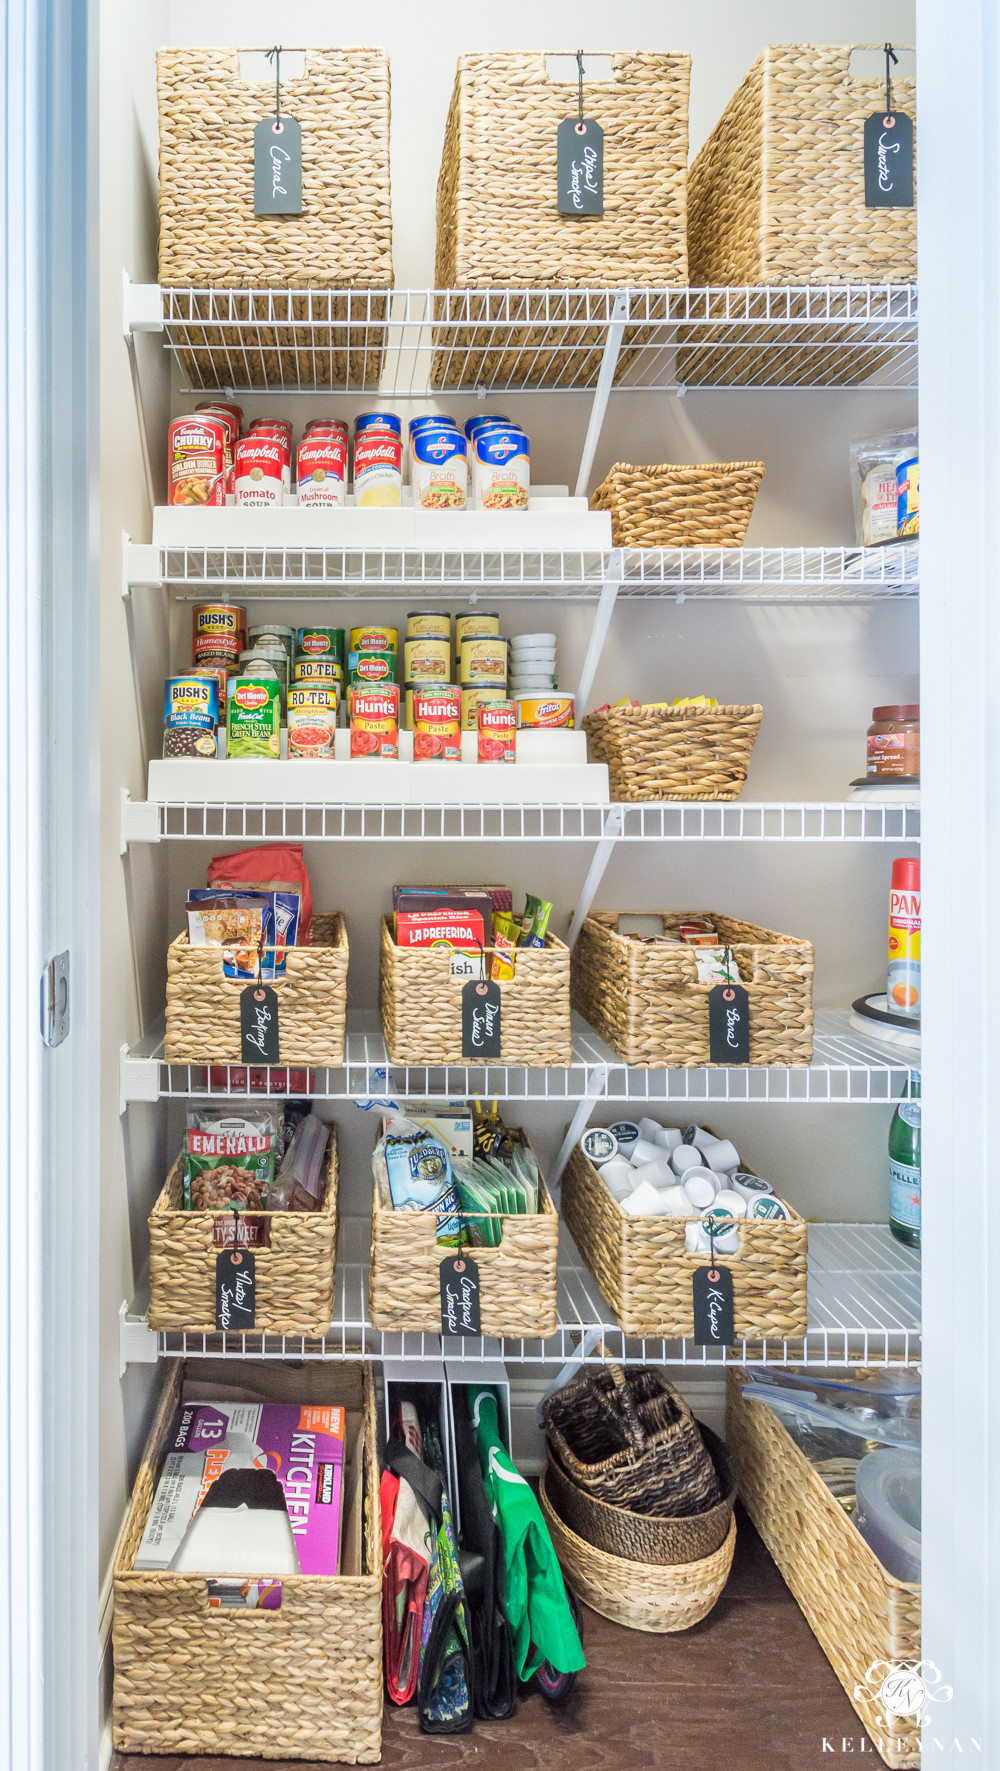 Pinterest Kitchen Organization
 Nine Ideas to Organize a Small Pantry with Wire Shelving